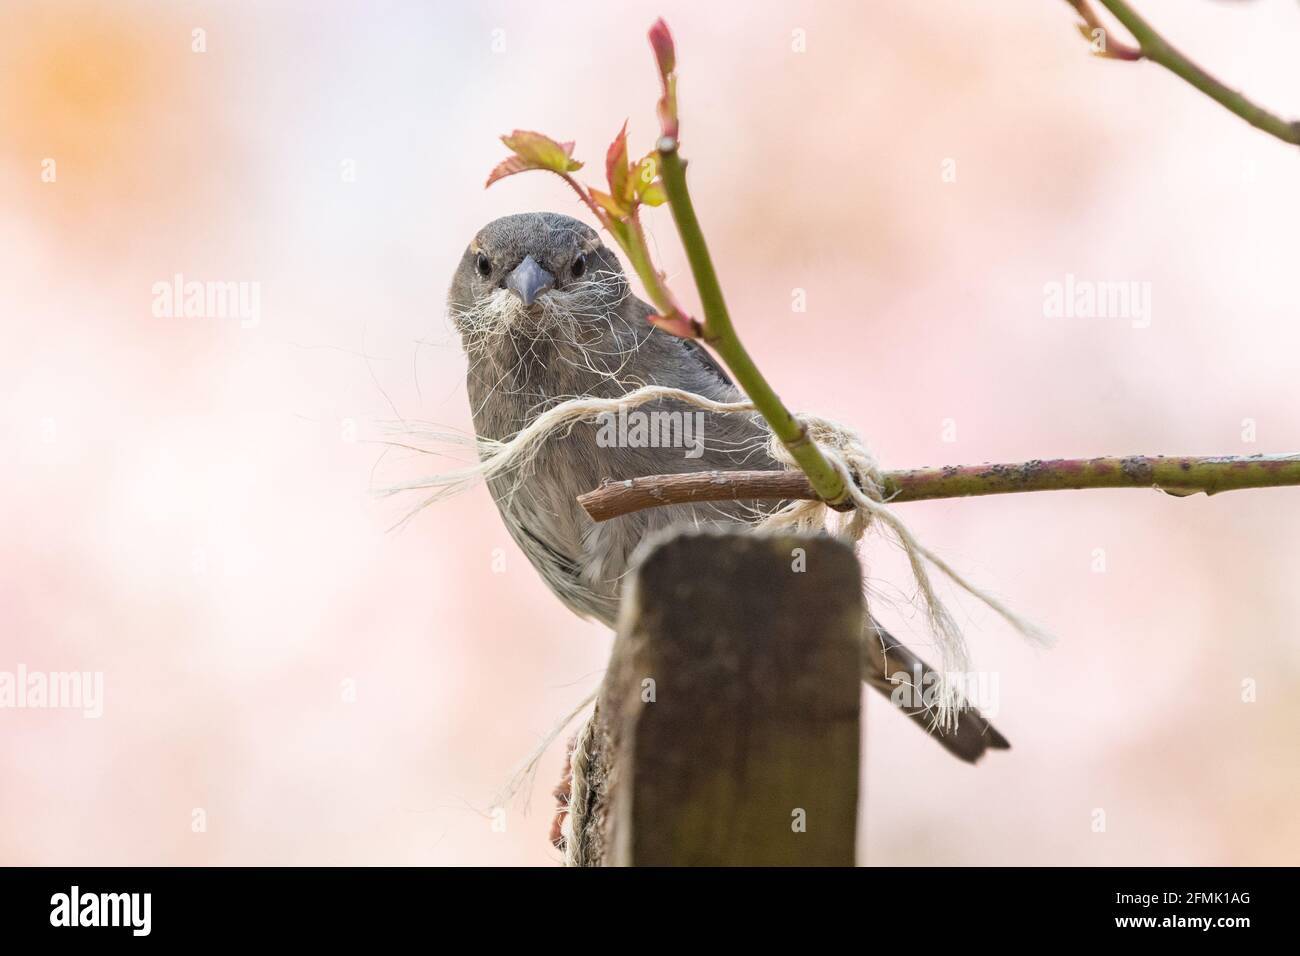 Wildlife friendly gardening - female house sparrow (passer domesticus) collecting strands of jute twine for nesting material in UK garden in spring Stock Photo